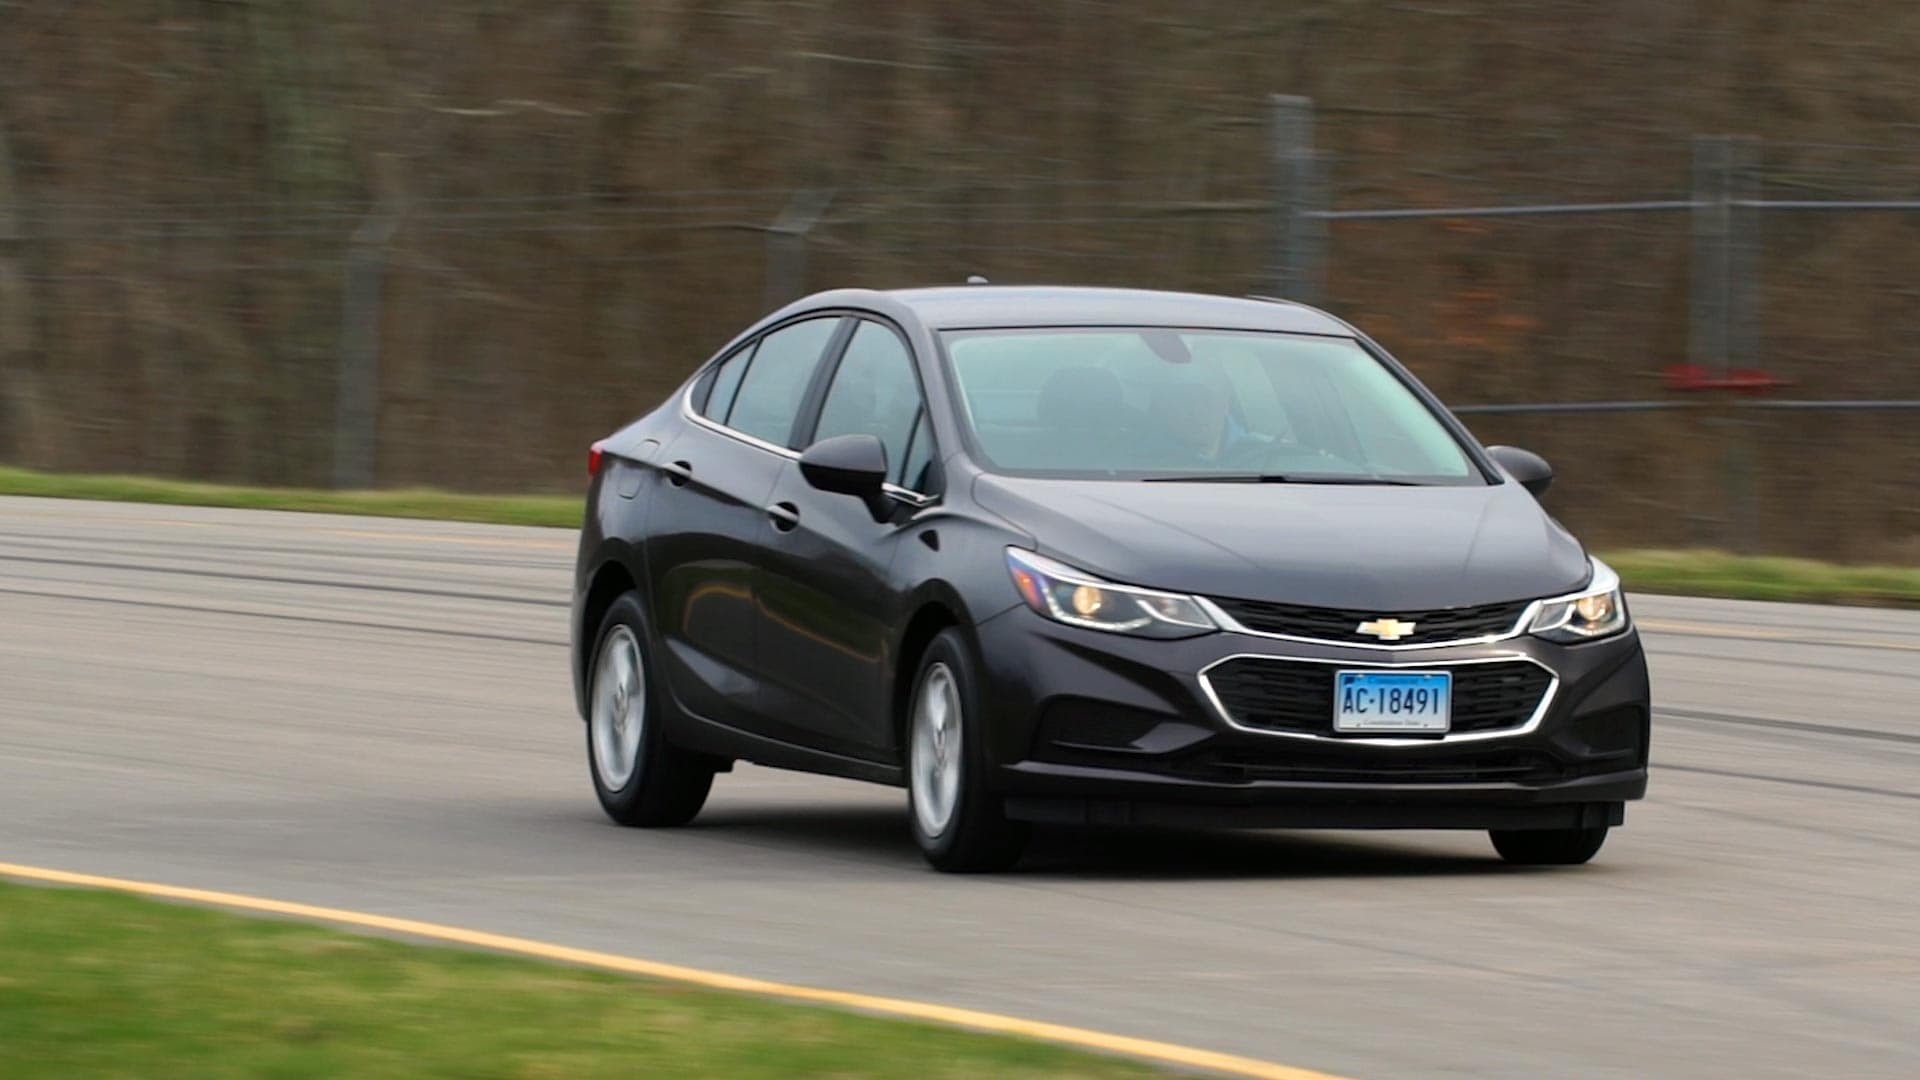 Chevrolet Cruze Diesel Impresses With Up To 52 MPG